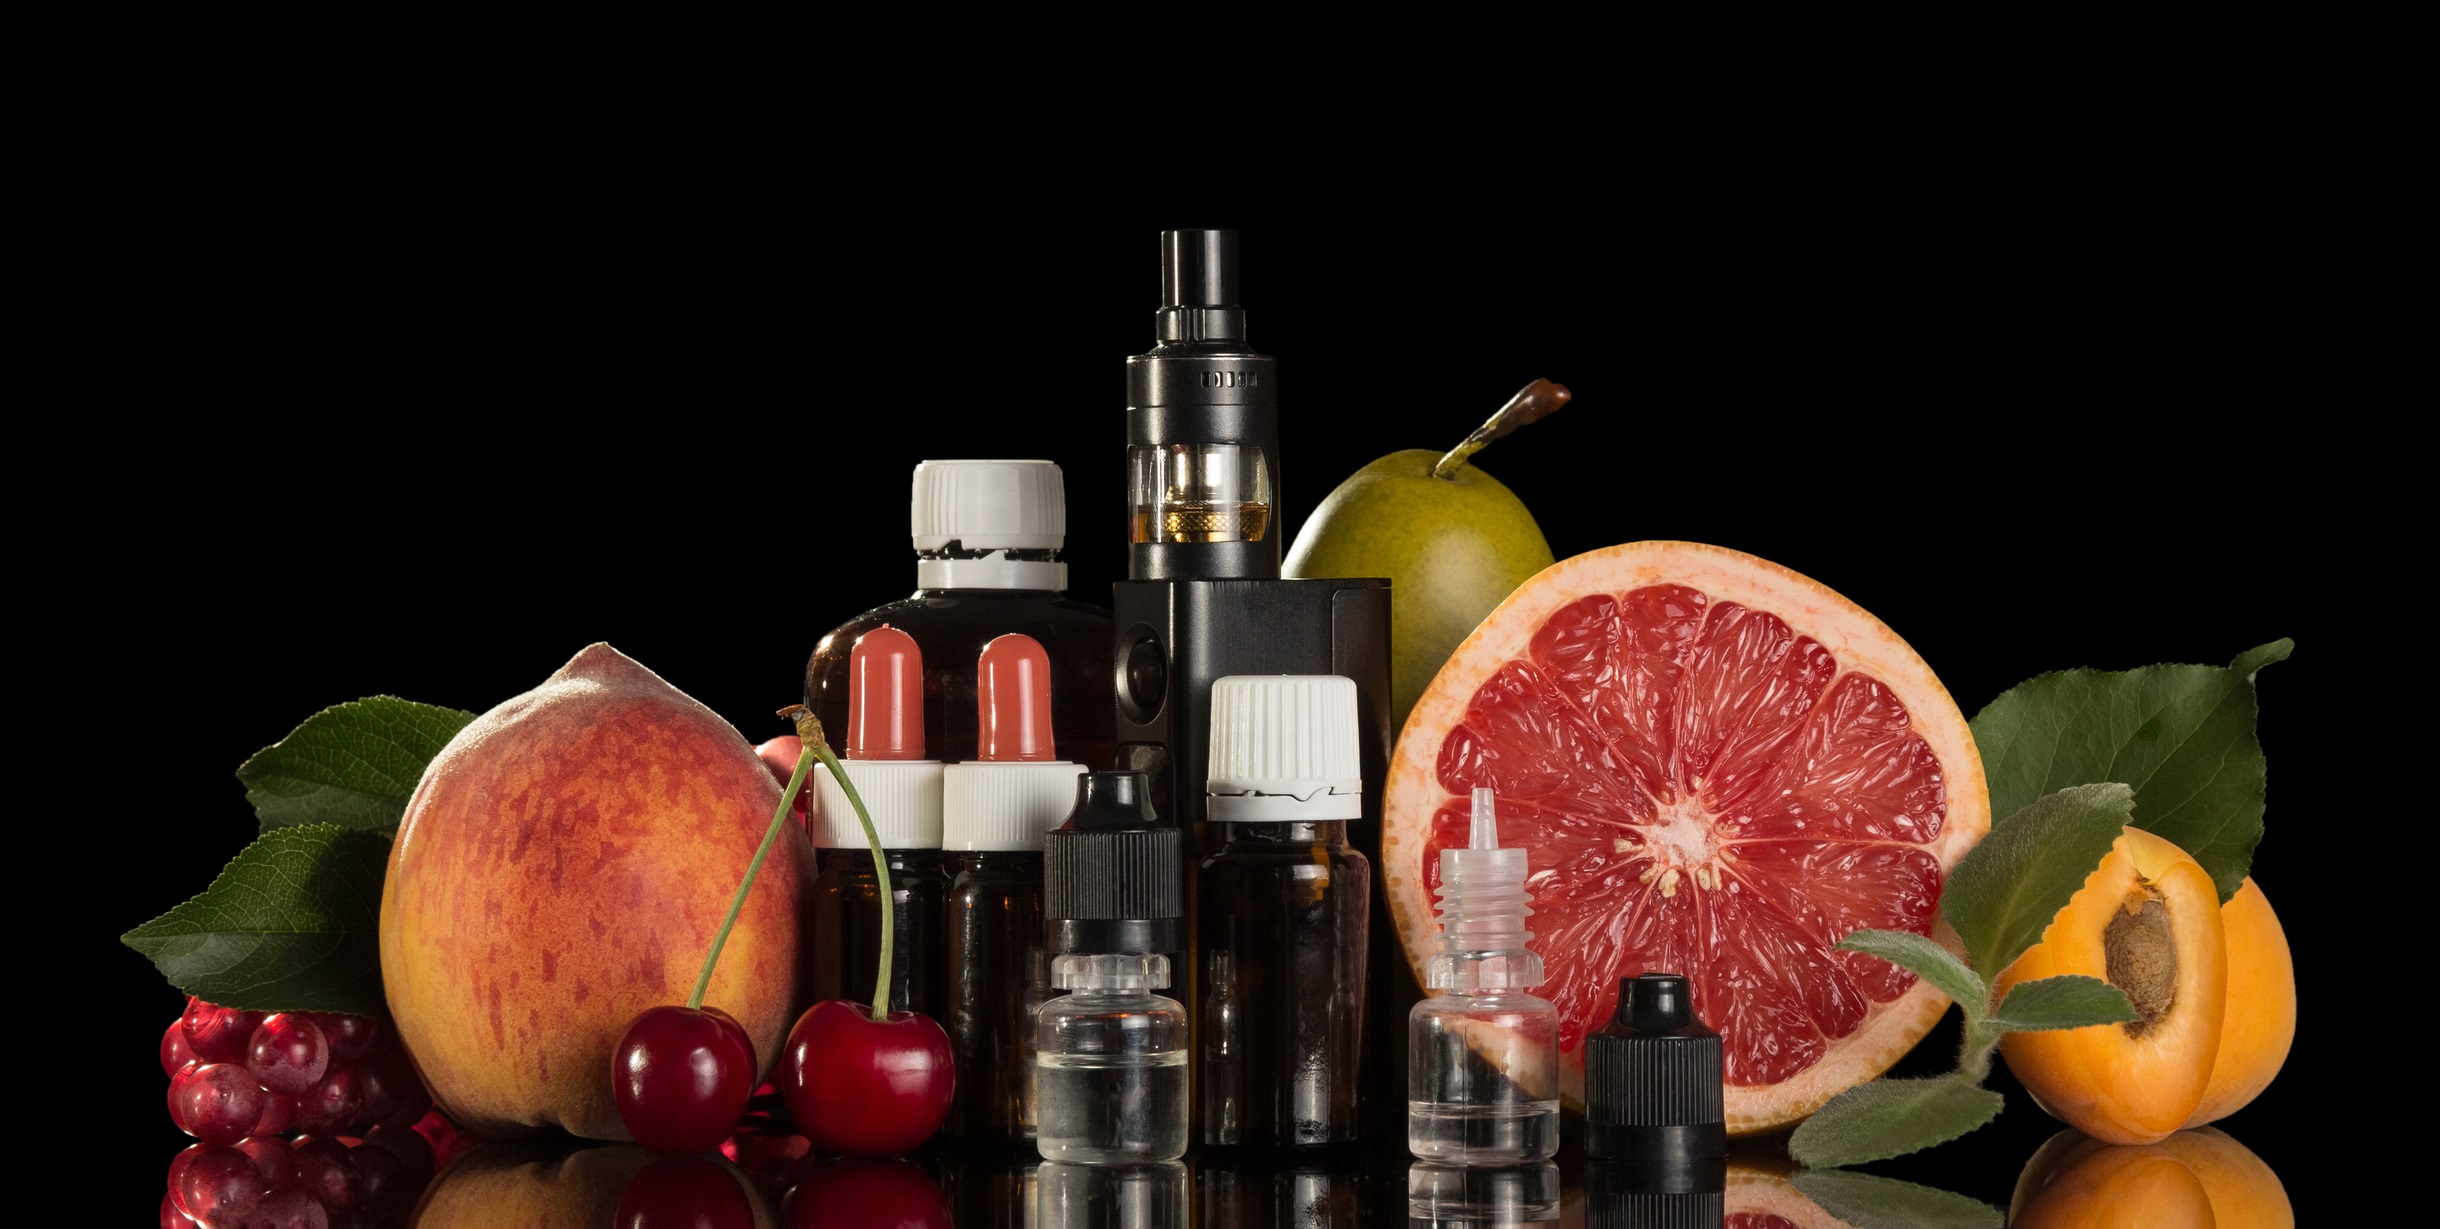 Flavored Vaping Products